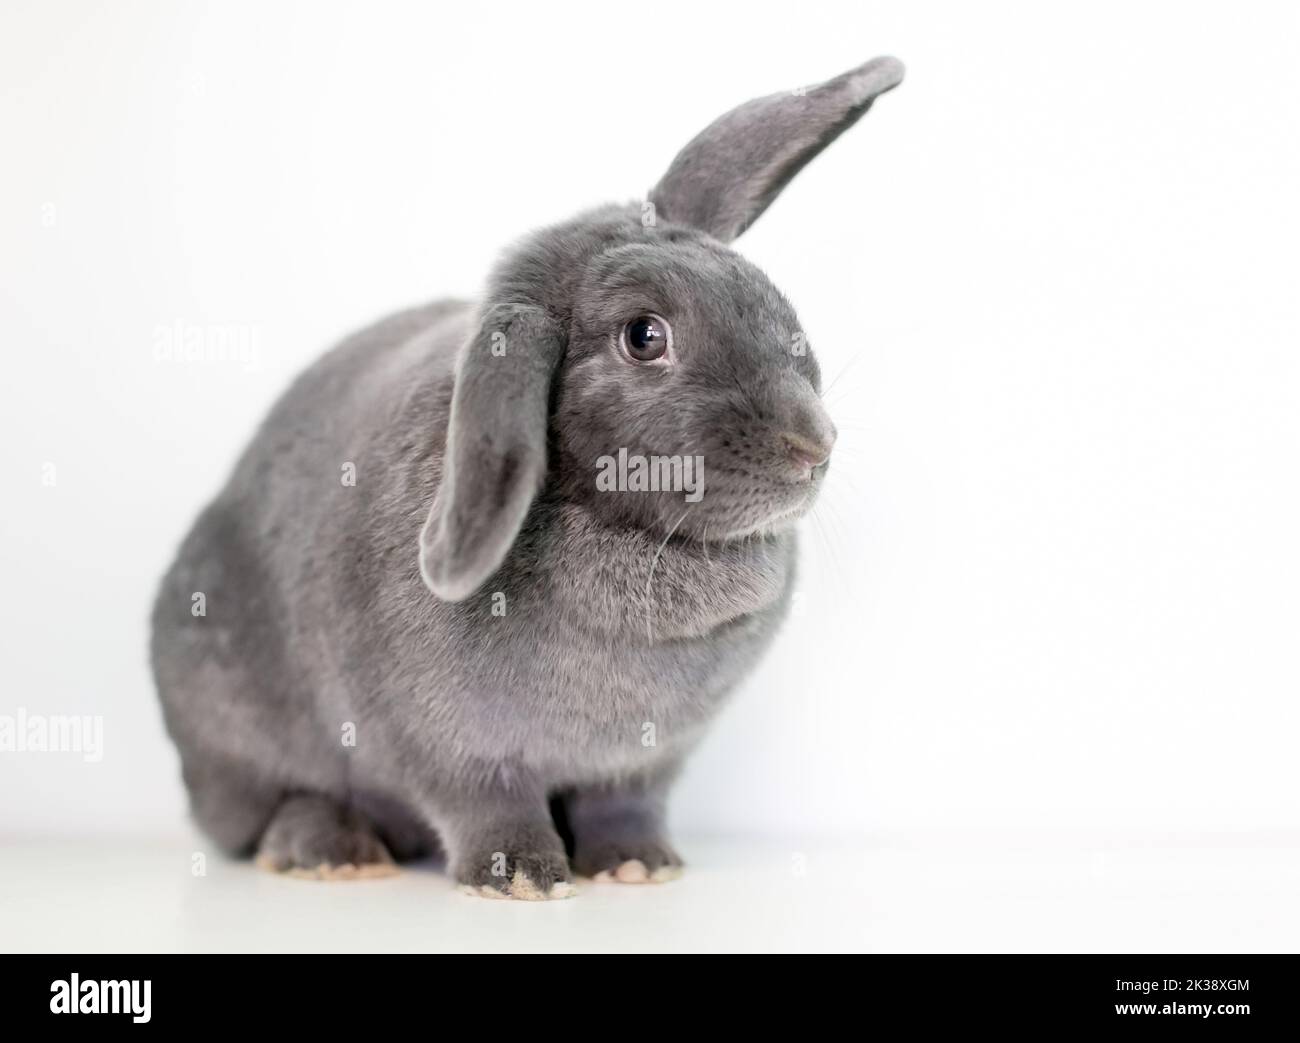 A gray pet rabbit holding its ears in a half lop position Stock Photo